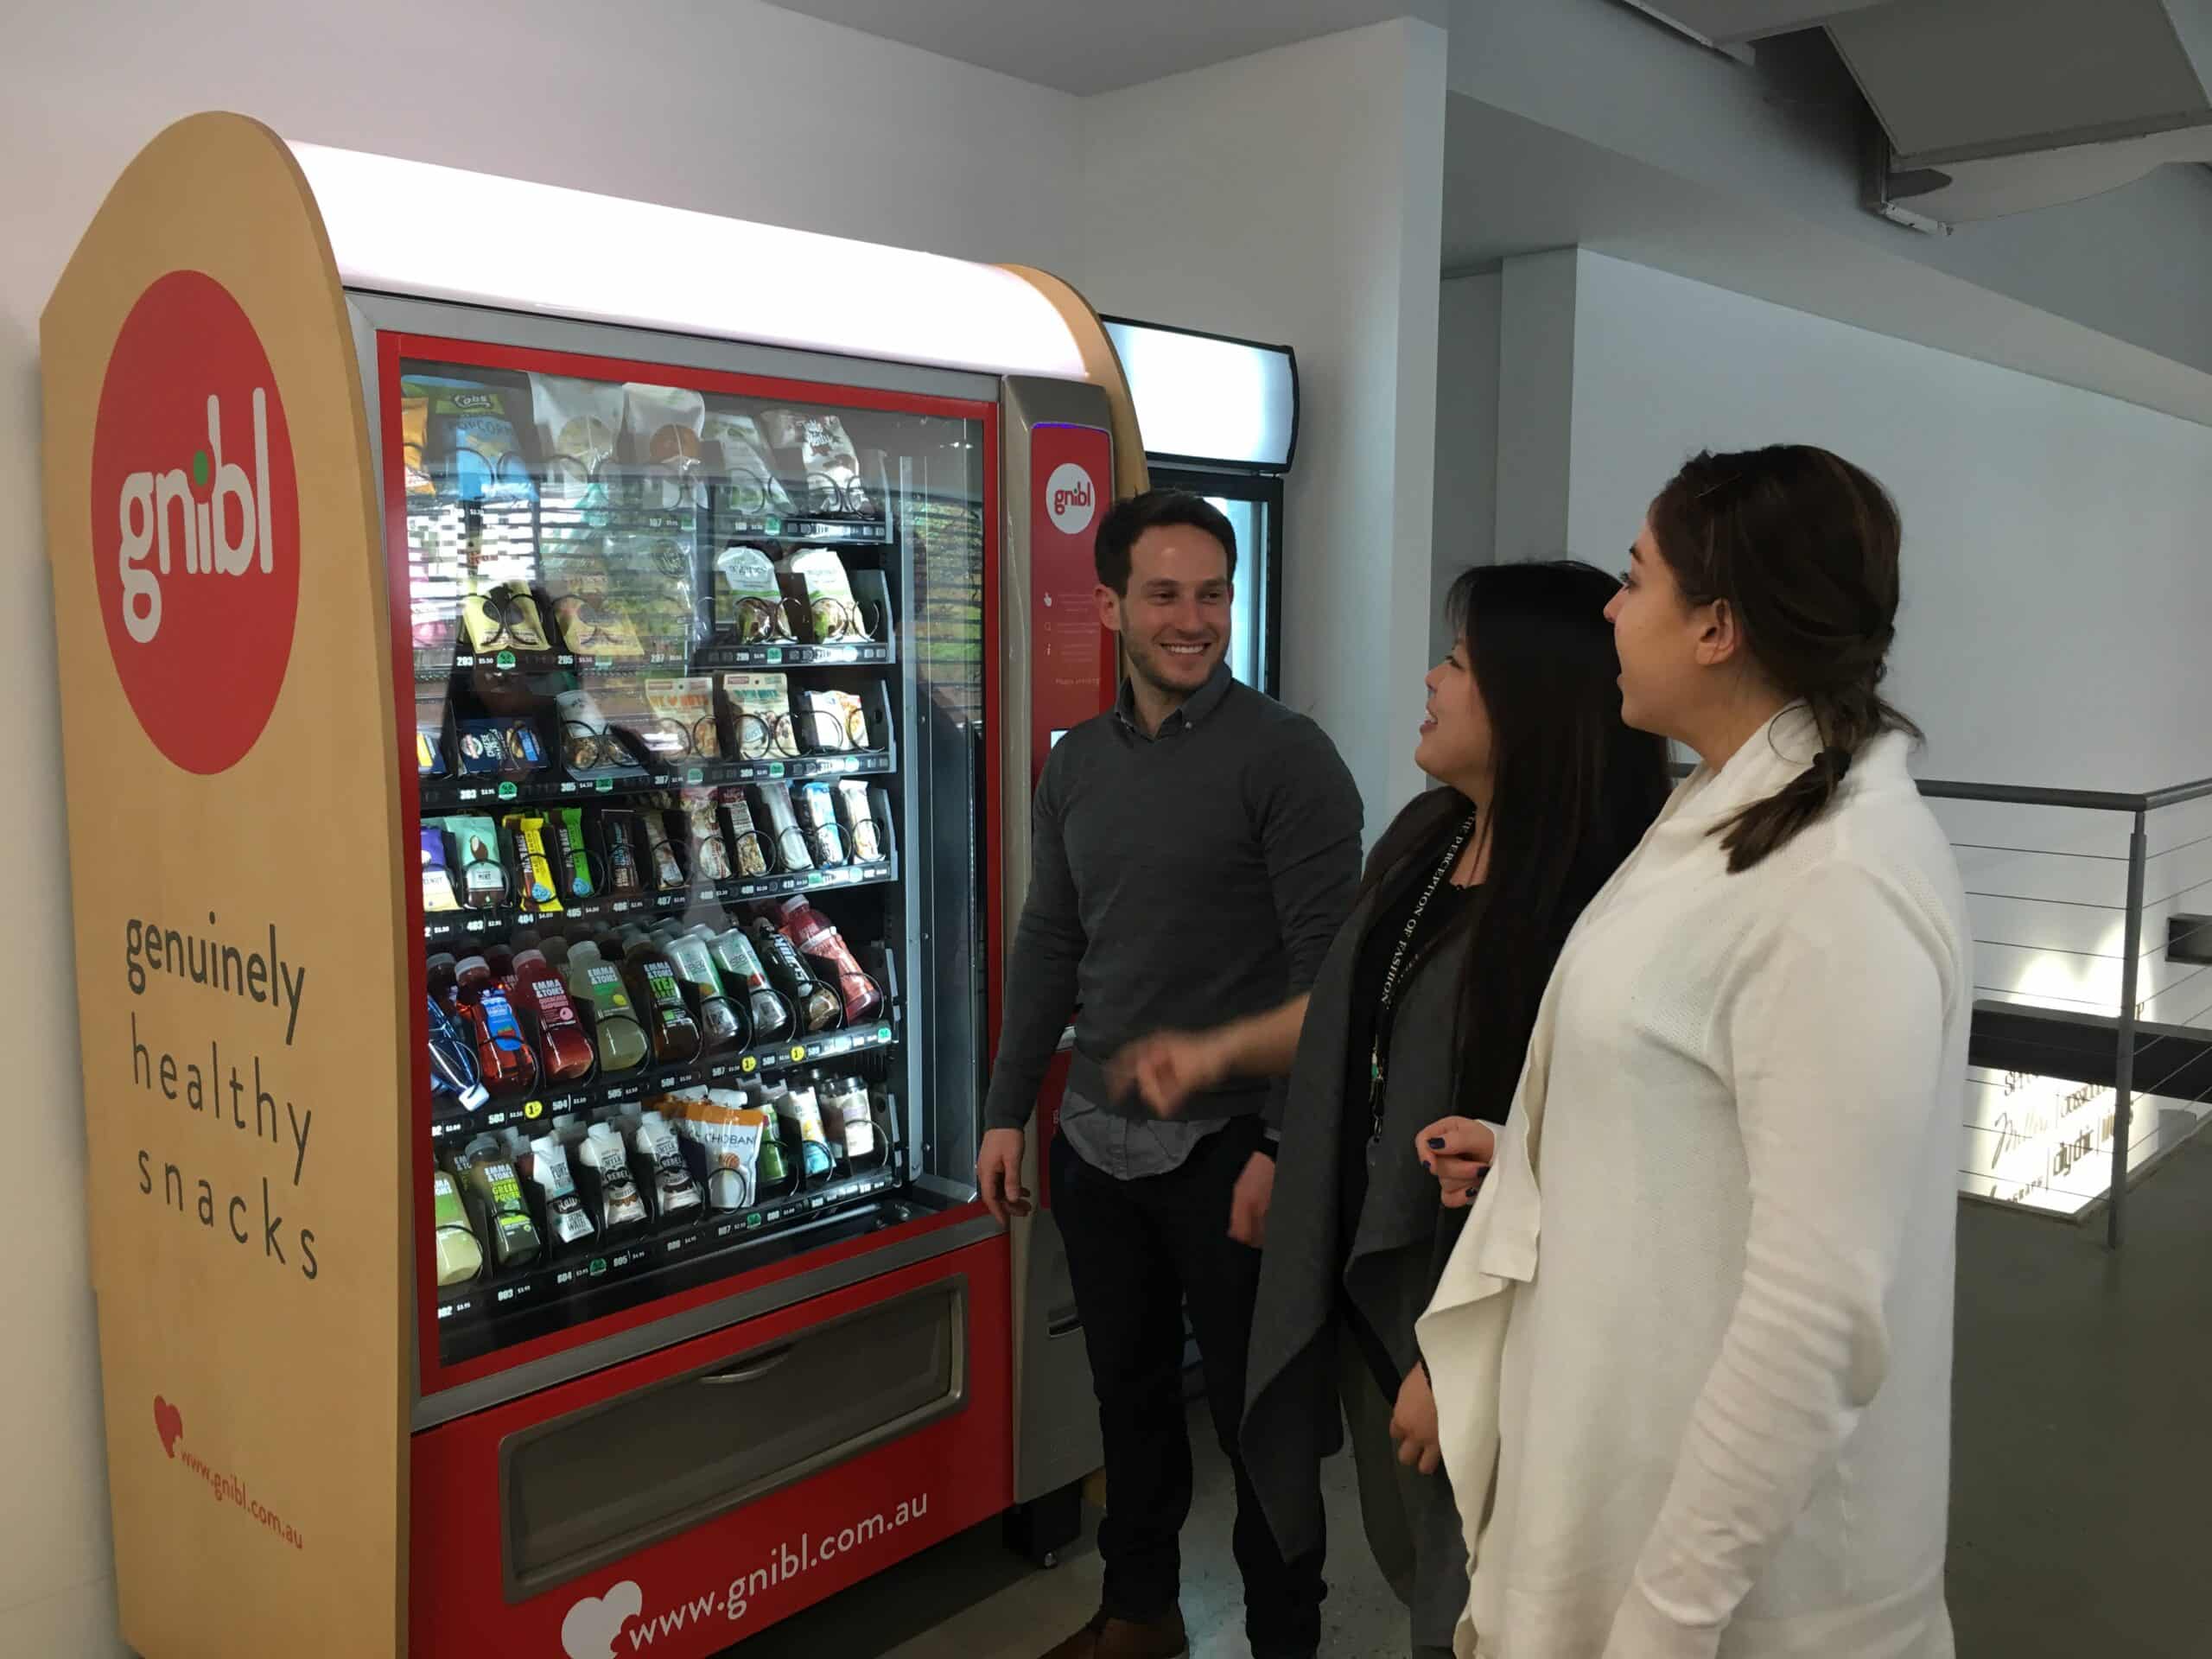 Gnibl Founder Nick Volpe with two women in front of a Gnibl vending machine in a workplace setting.